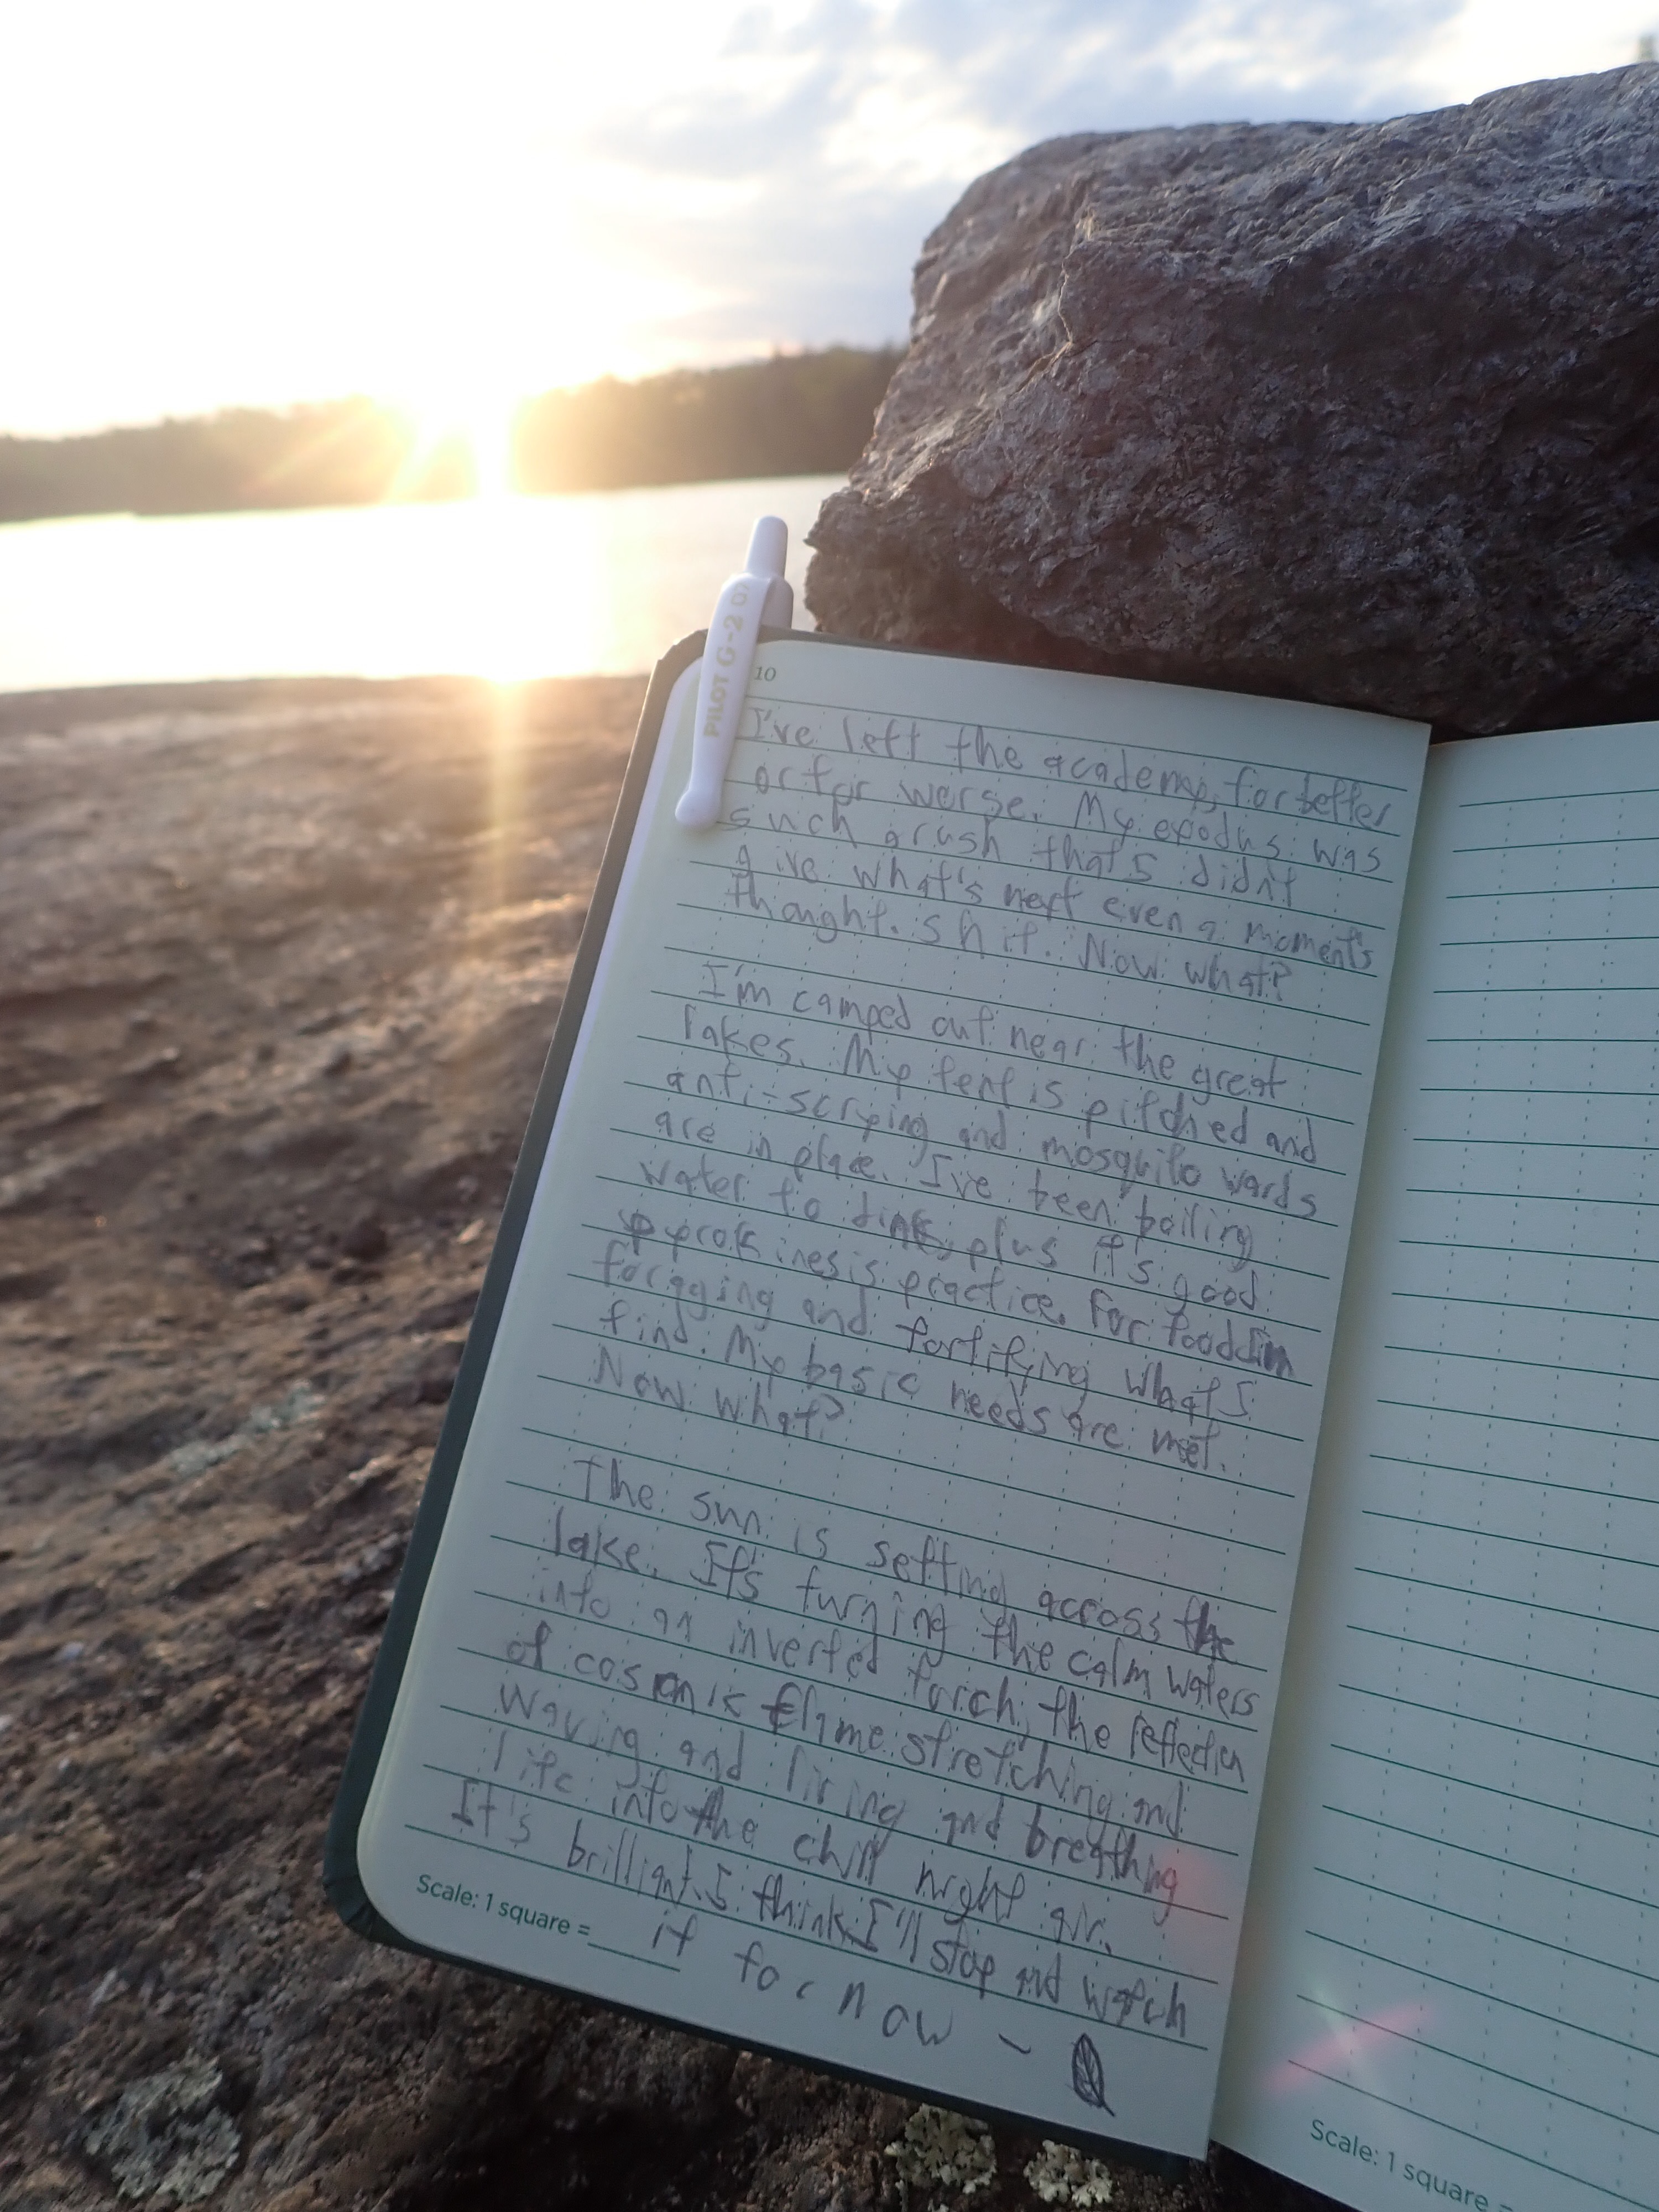 a picture of a notebook with a pen clipped to it resting against a stone, overlooking a lake and pine trees on the other side, with the sun setting. written in the notebook are the above contents.